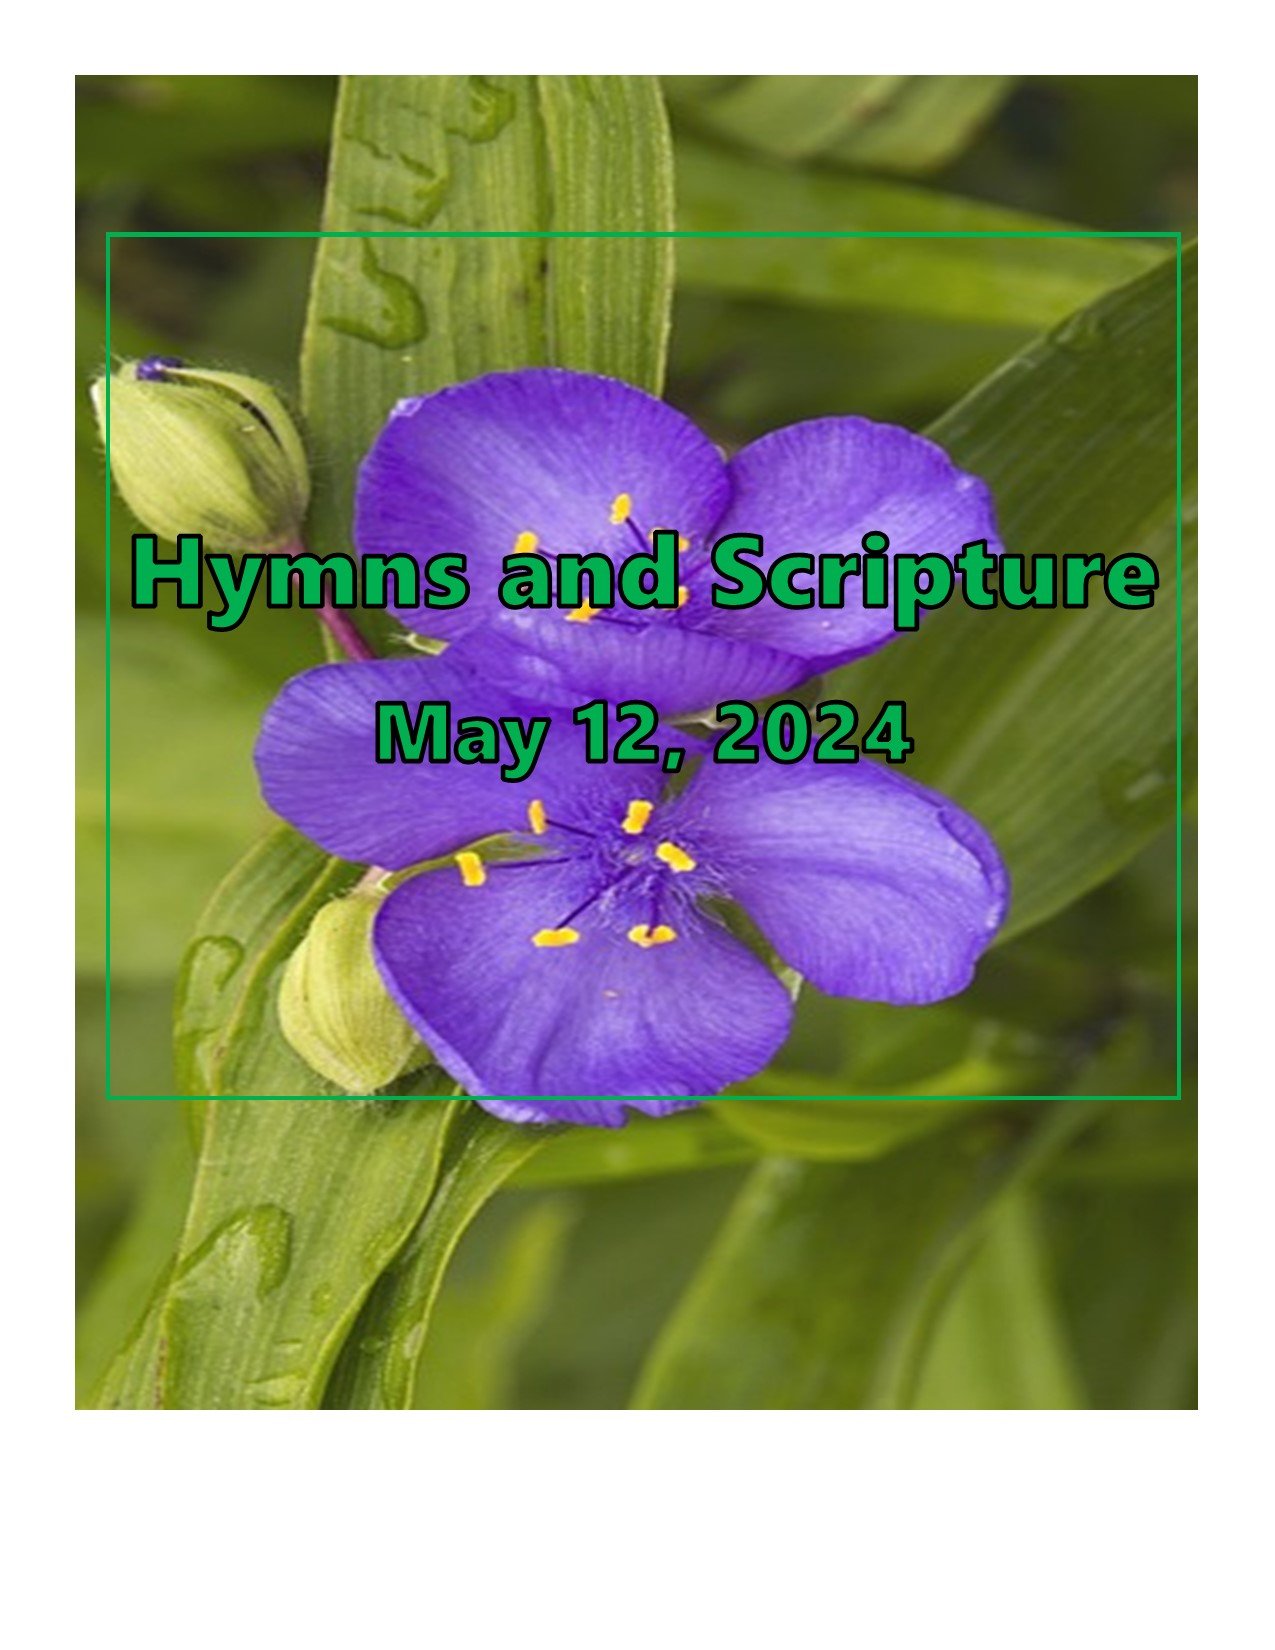 a Button -Hymns and Scripture  May 12, 2024.jpg